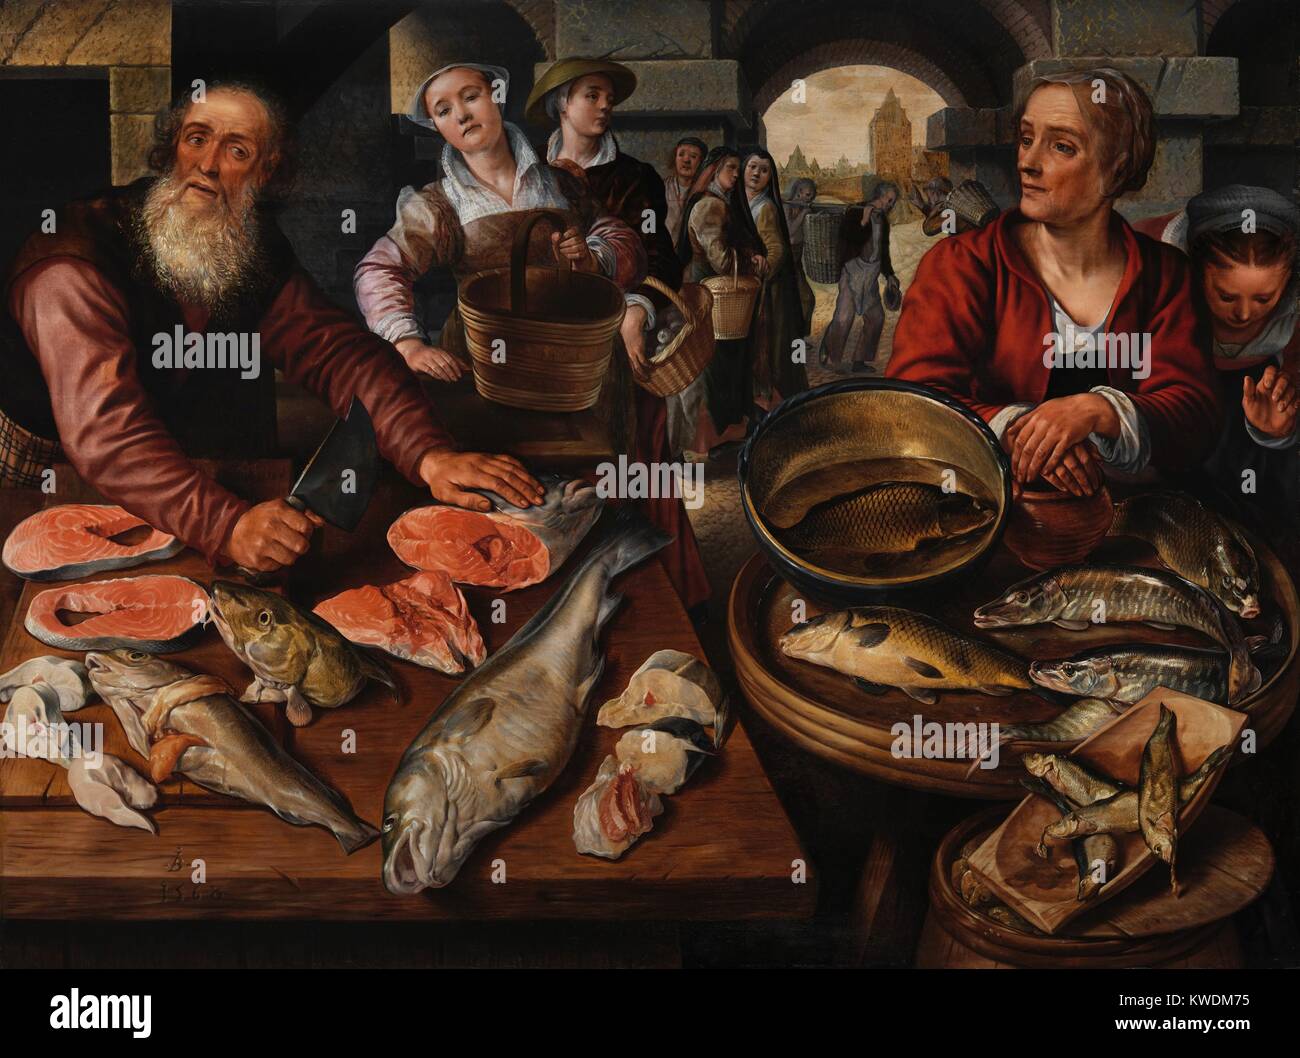 FISHMARKET, by Joachim Beuckelaer, 1568, Netherlandish, Northern Renaissance oil painting. This daily fish market represents the new genre of still-life painting, celebrating abundance and commerce in Antwerp. Northern Netherlands artists turned to secular themes when Calvinist Iconoclasm of 1566, limited the market for religious subjects (BSLOC 2017 16 121) Stock Photo